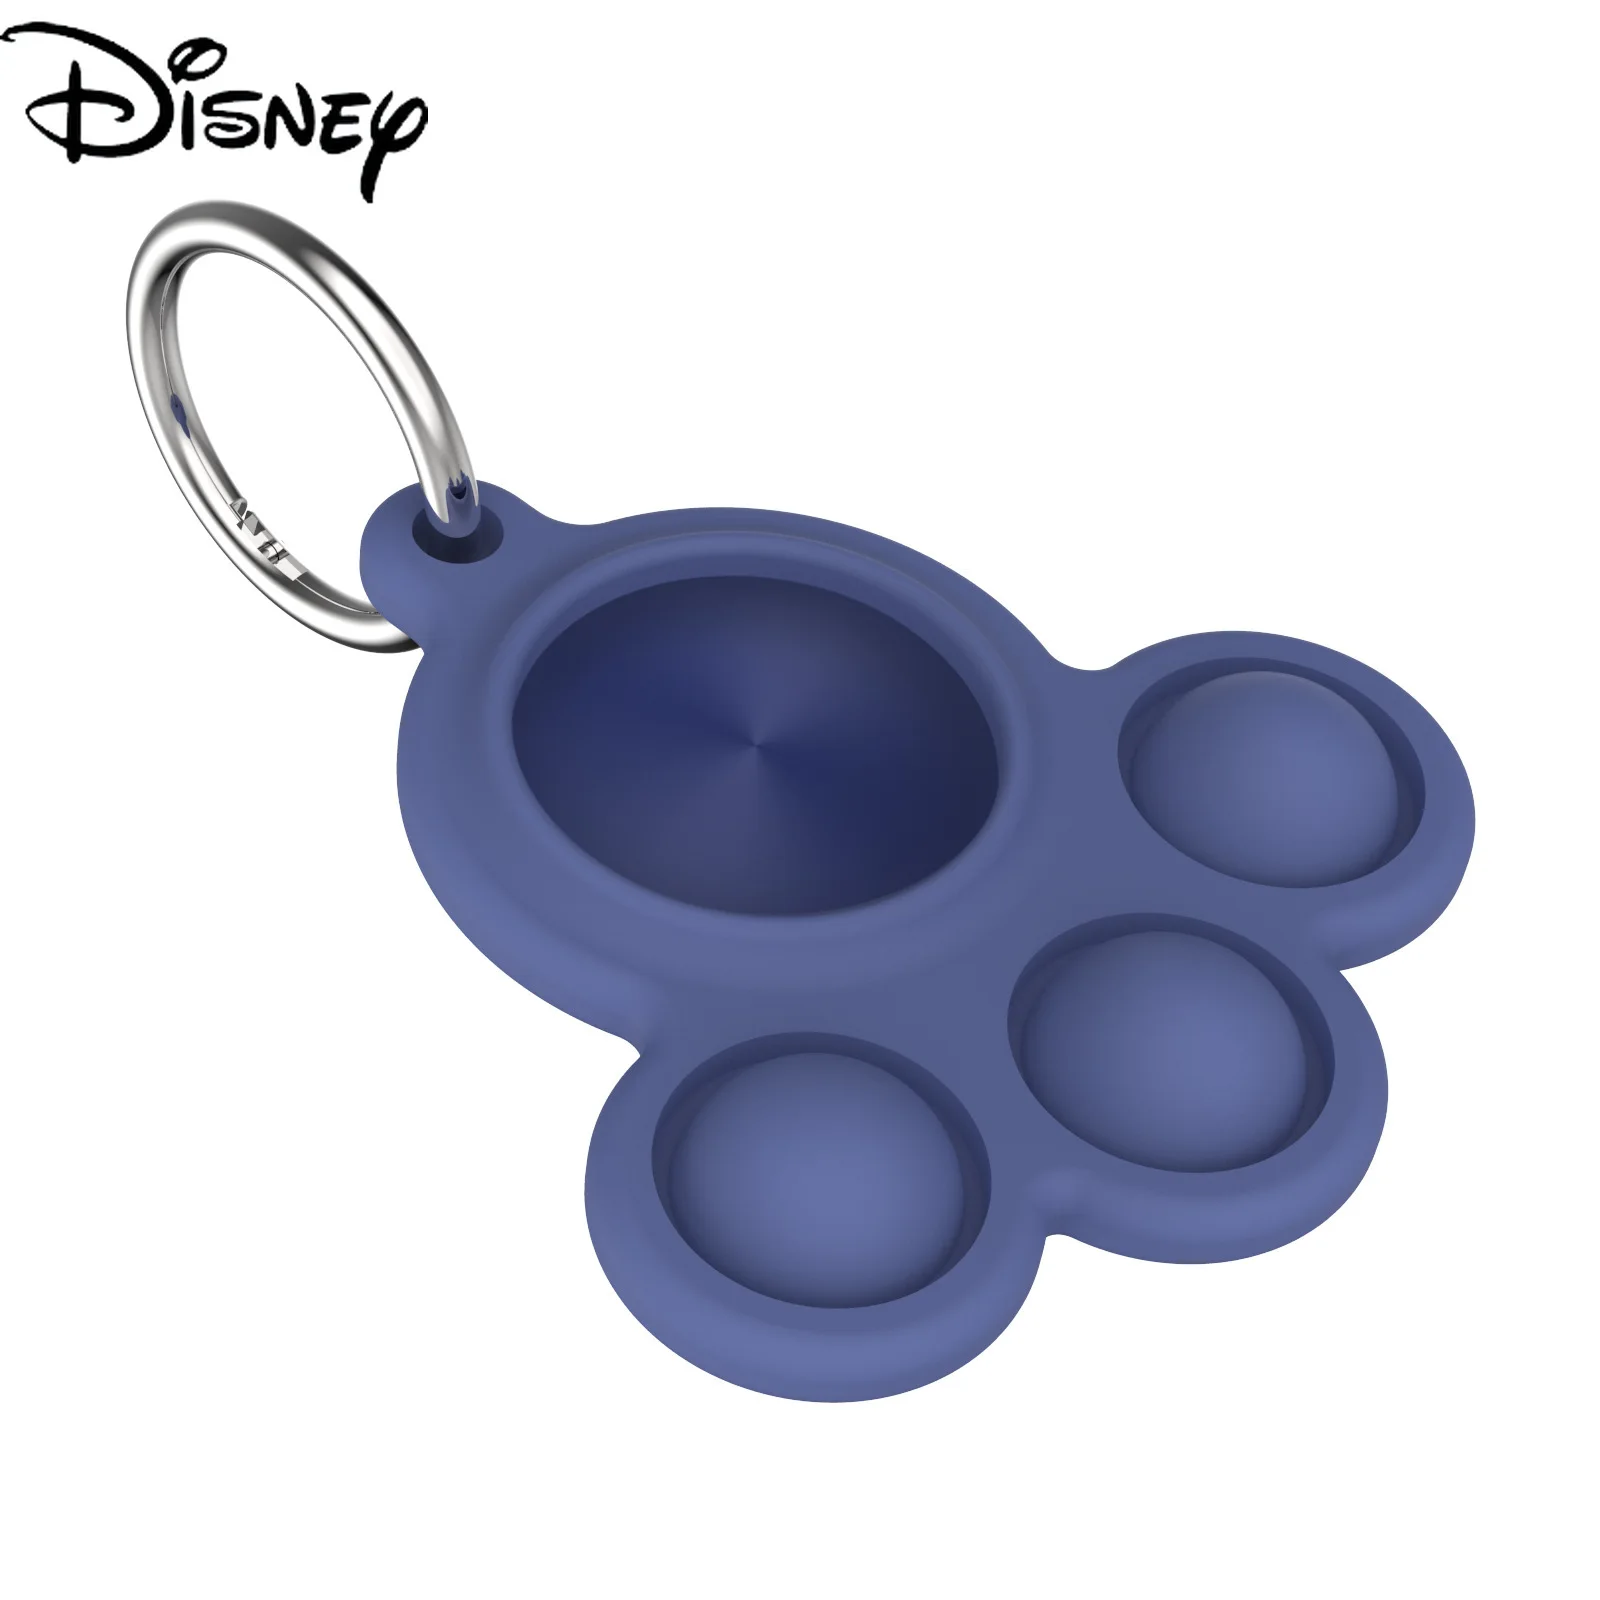 

Disney Mickey Minnie is suitable for Airtag Apple silicone anti-lost device tracker locator storage key wall pocket anti-fall